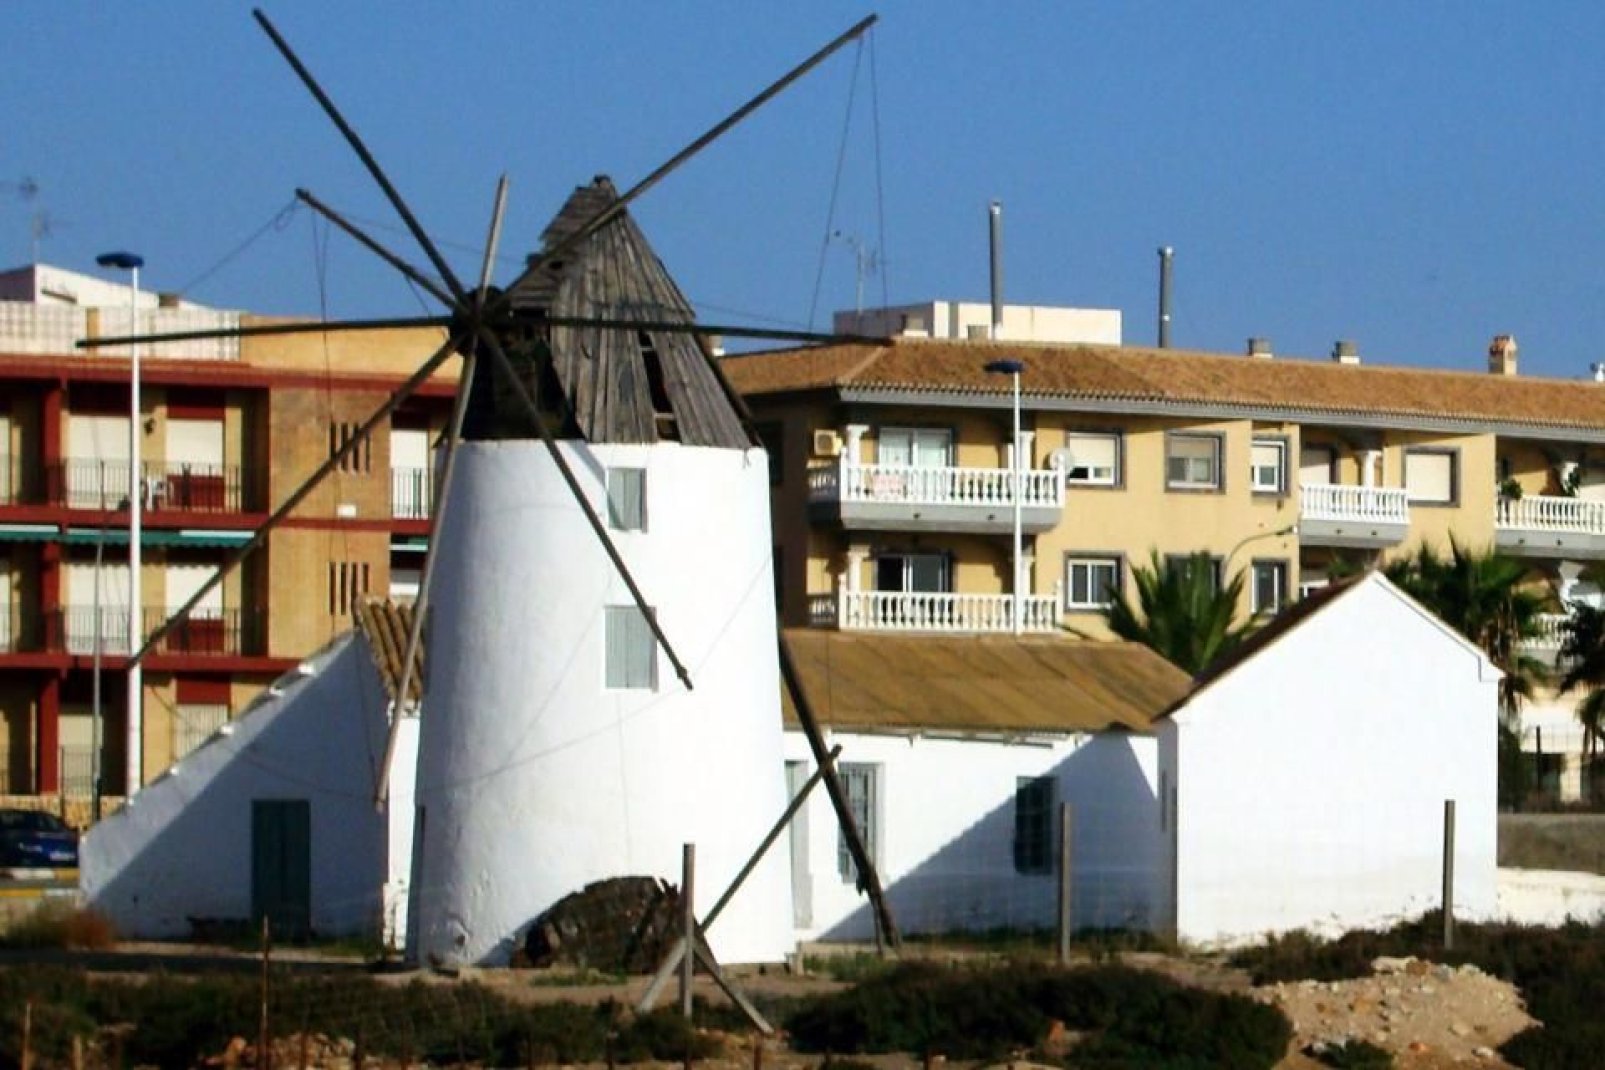 Murcia is a vast region encompassing dunes and beaches but also windmills at the salt flats.